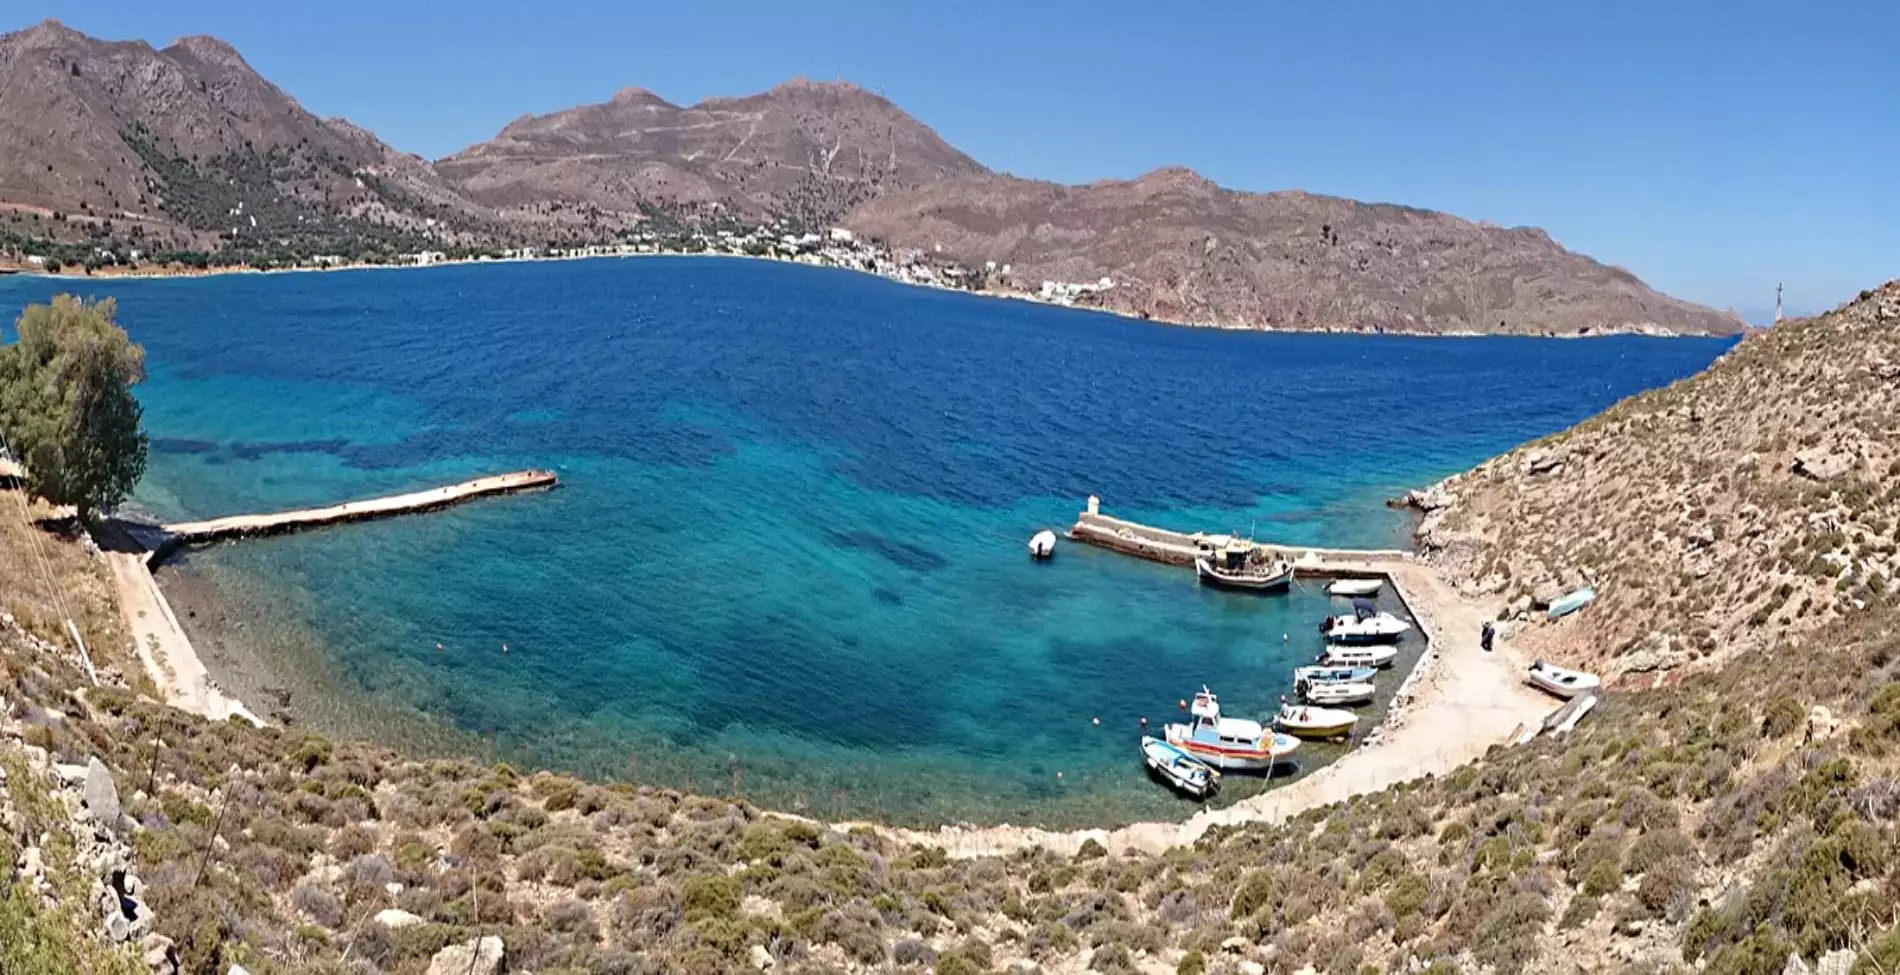 Tilos: What you don't know about the quiet emerald island of the Aegean Sea